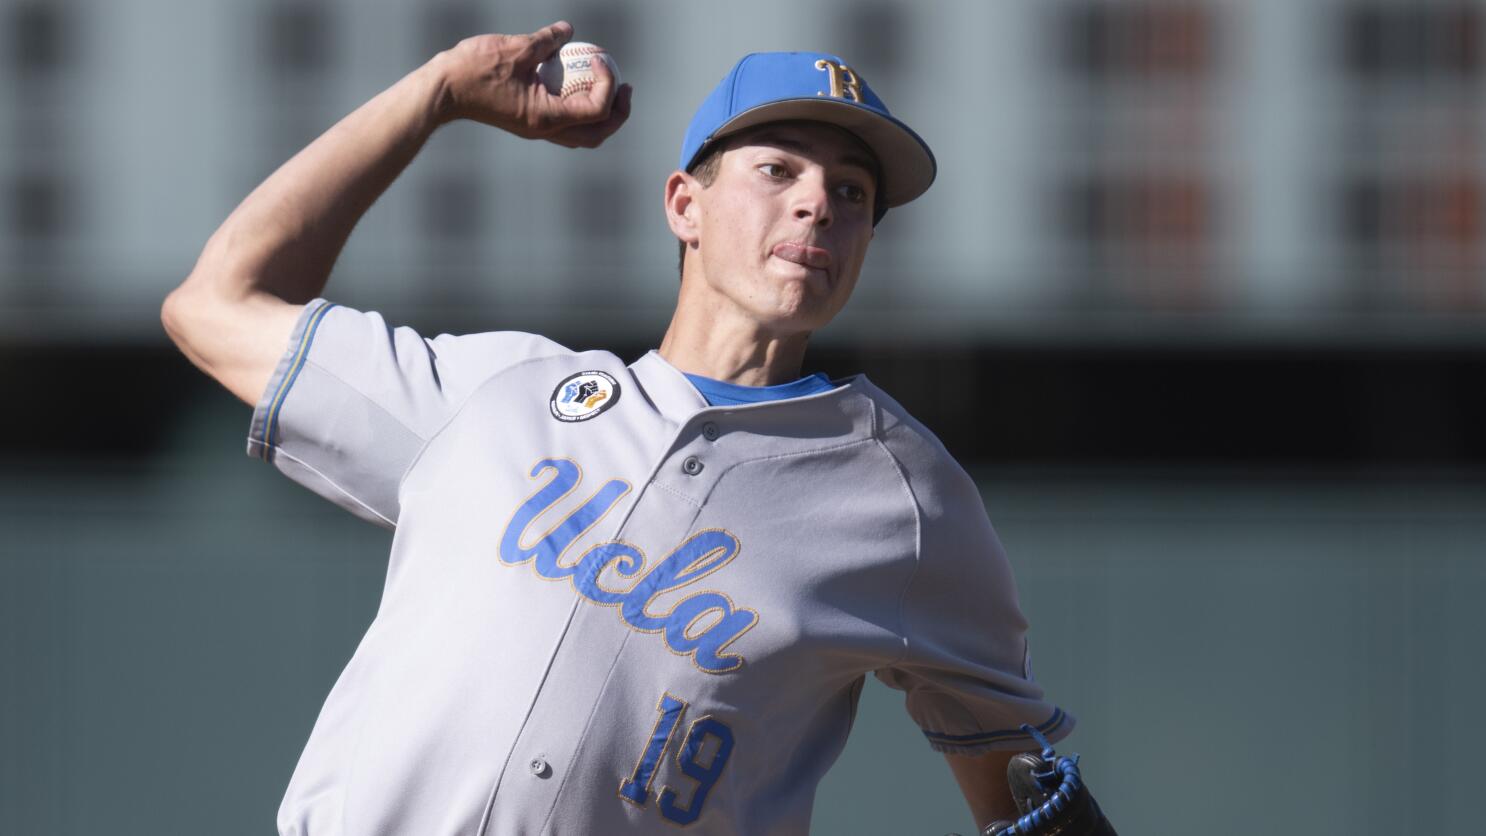 UCLA pitcher Jared Karros gets his wish with joining Dodgers - Los